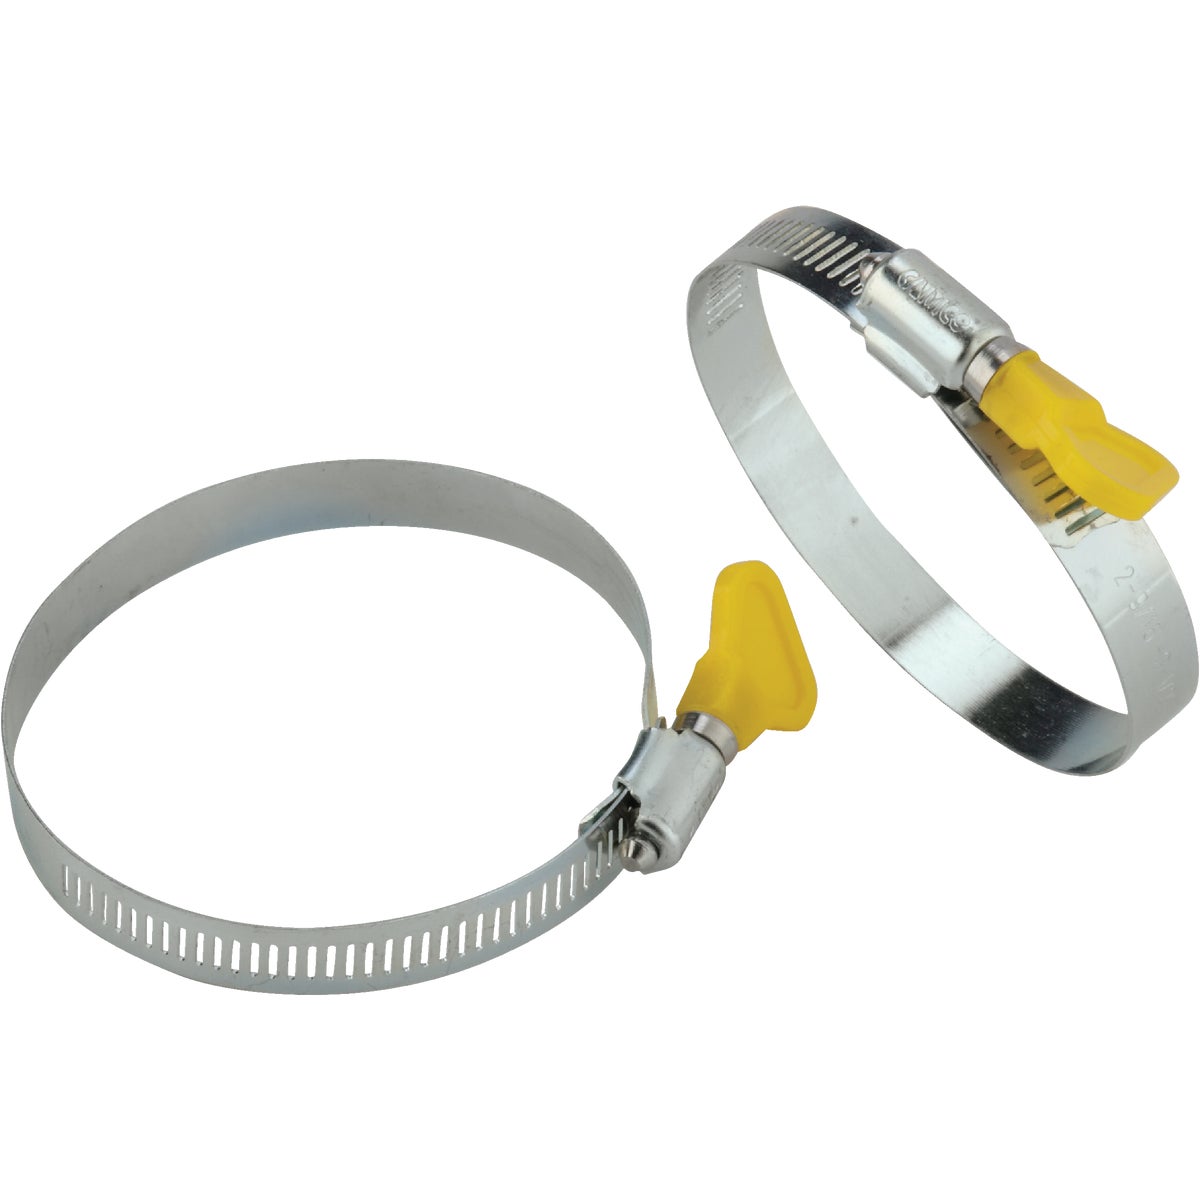 Item 576825, Easy-to-use Twist-It clamps require no tools, just position the clamp and 